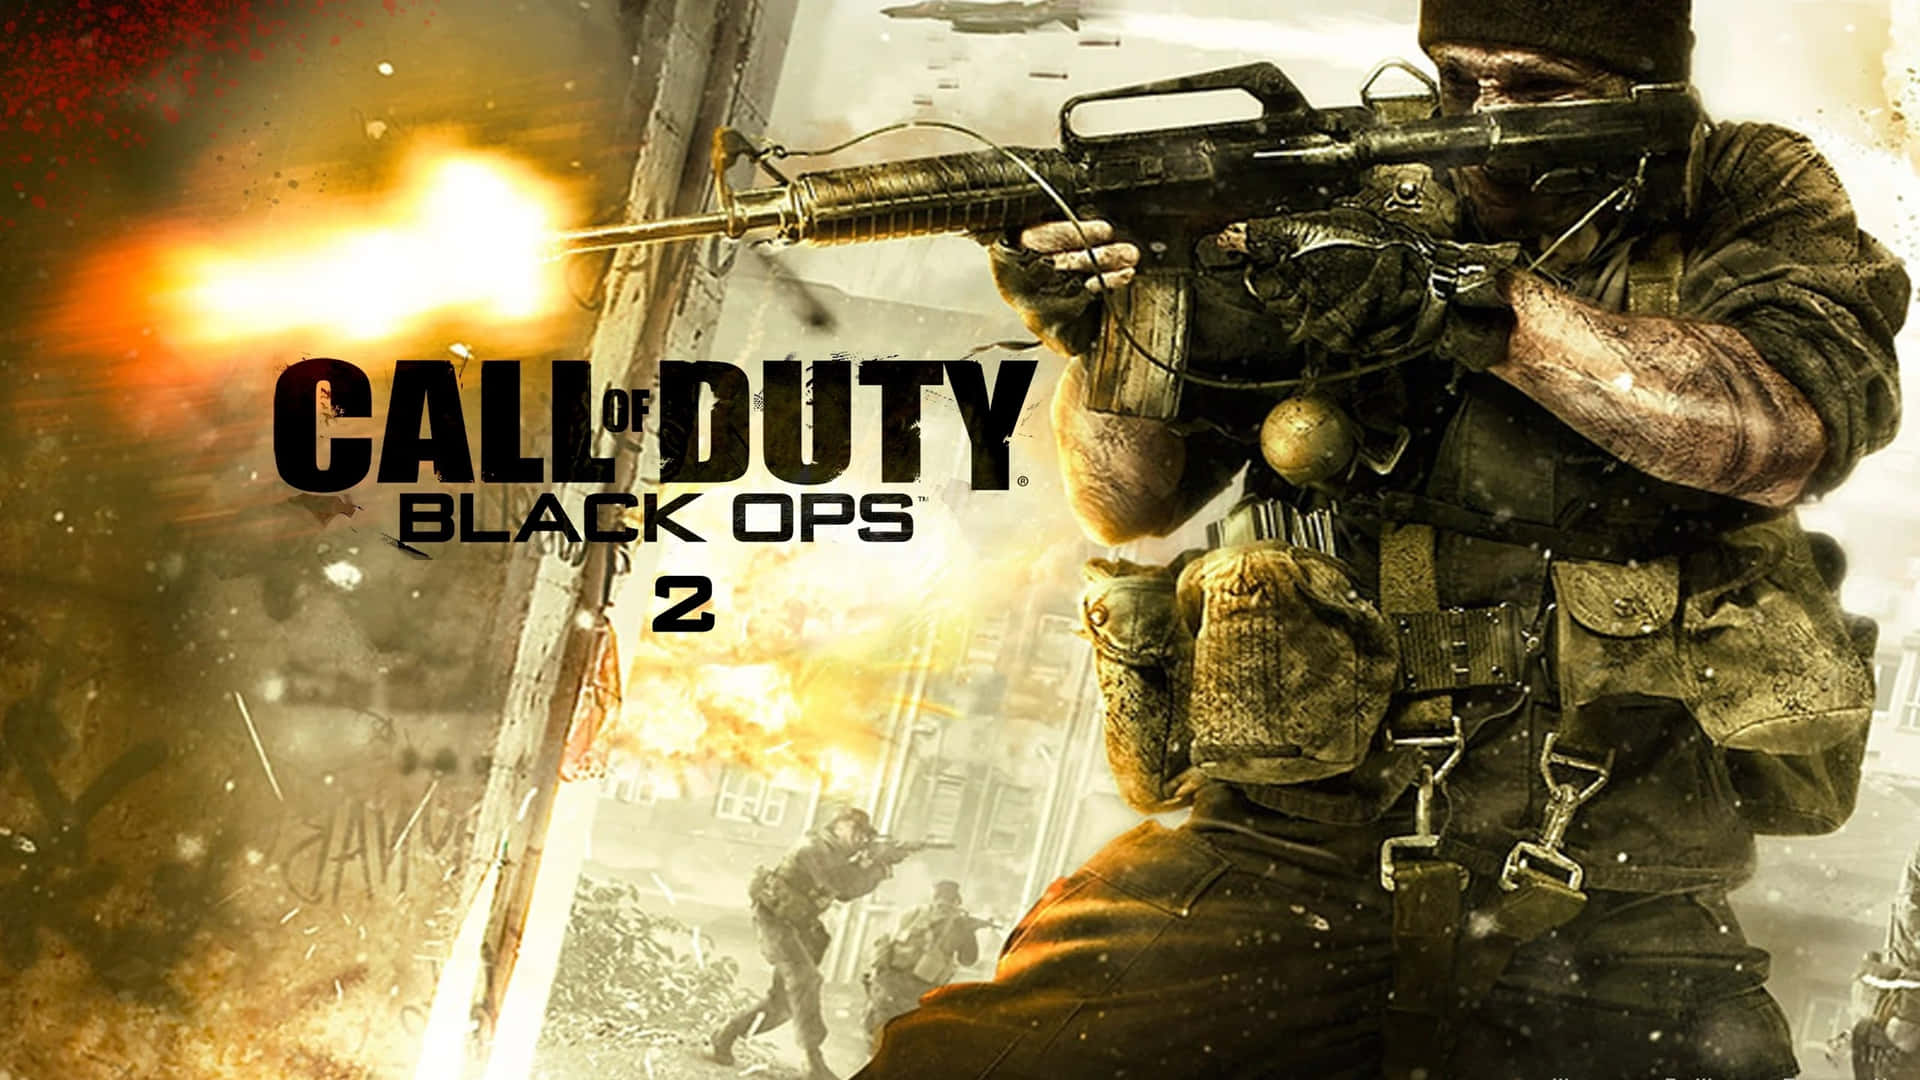 2560 X 1440 Black Ops 2 Game Poster Background